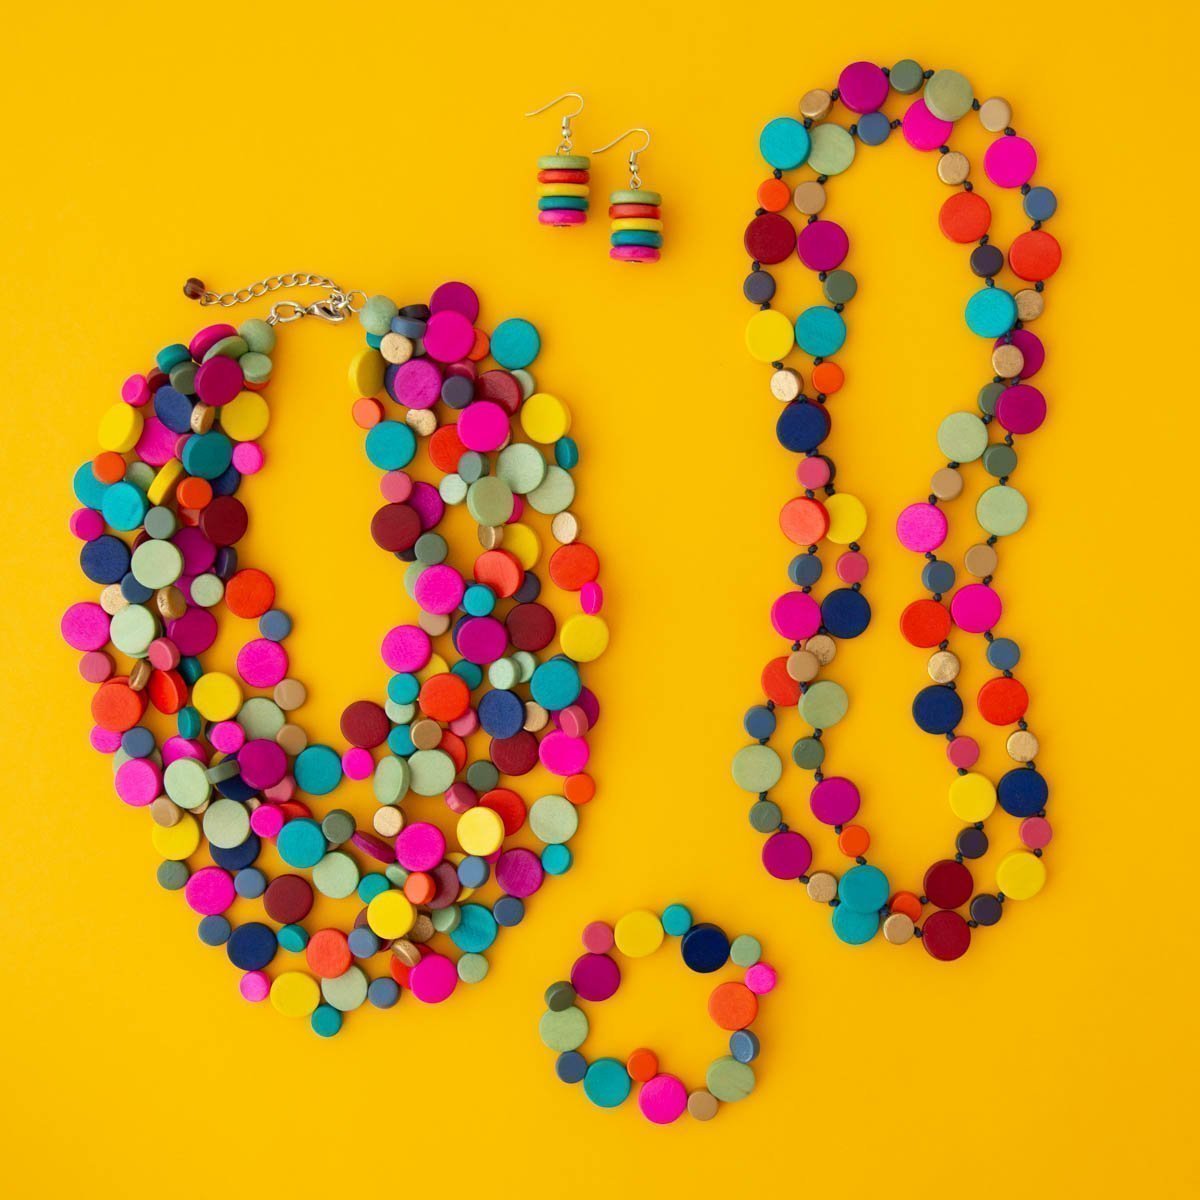 Bright rainbow collection of beaded jewels on yellow background.